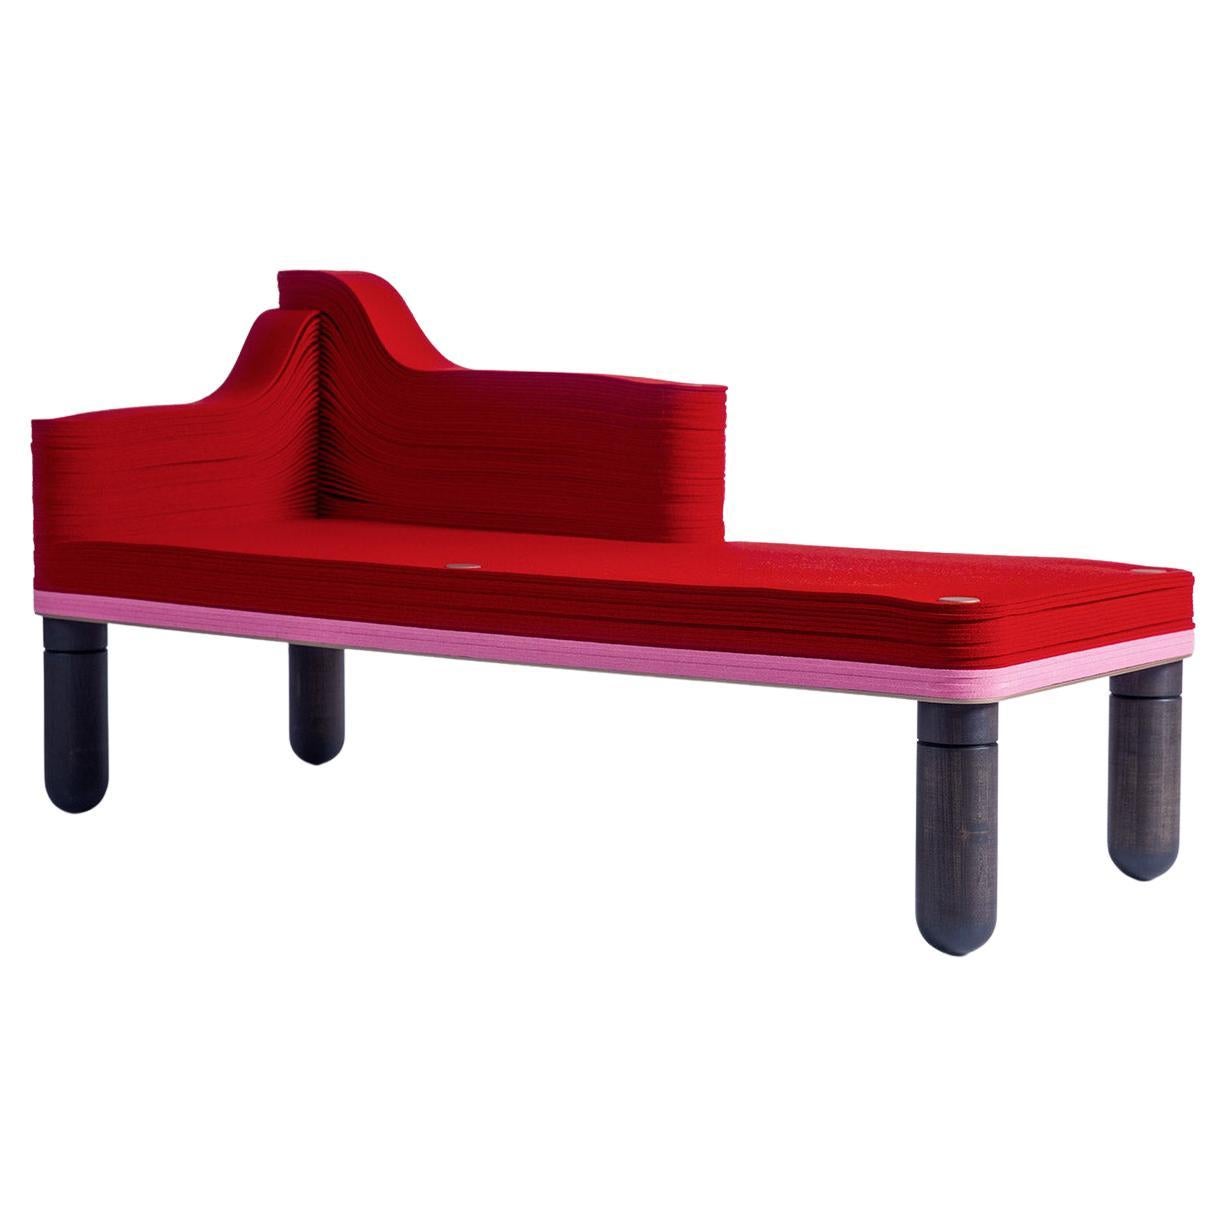 Madame B, Felt and Wood Chaise Lounge, Drake / Anderson in Stackabl For Sale